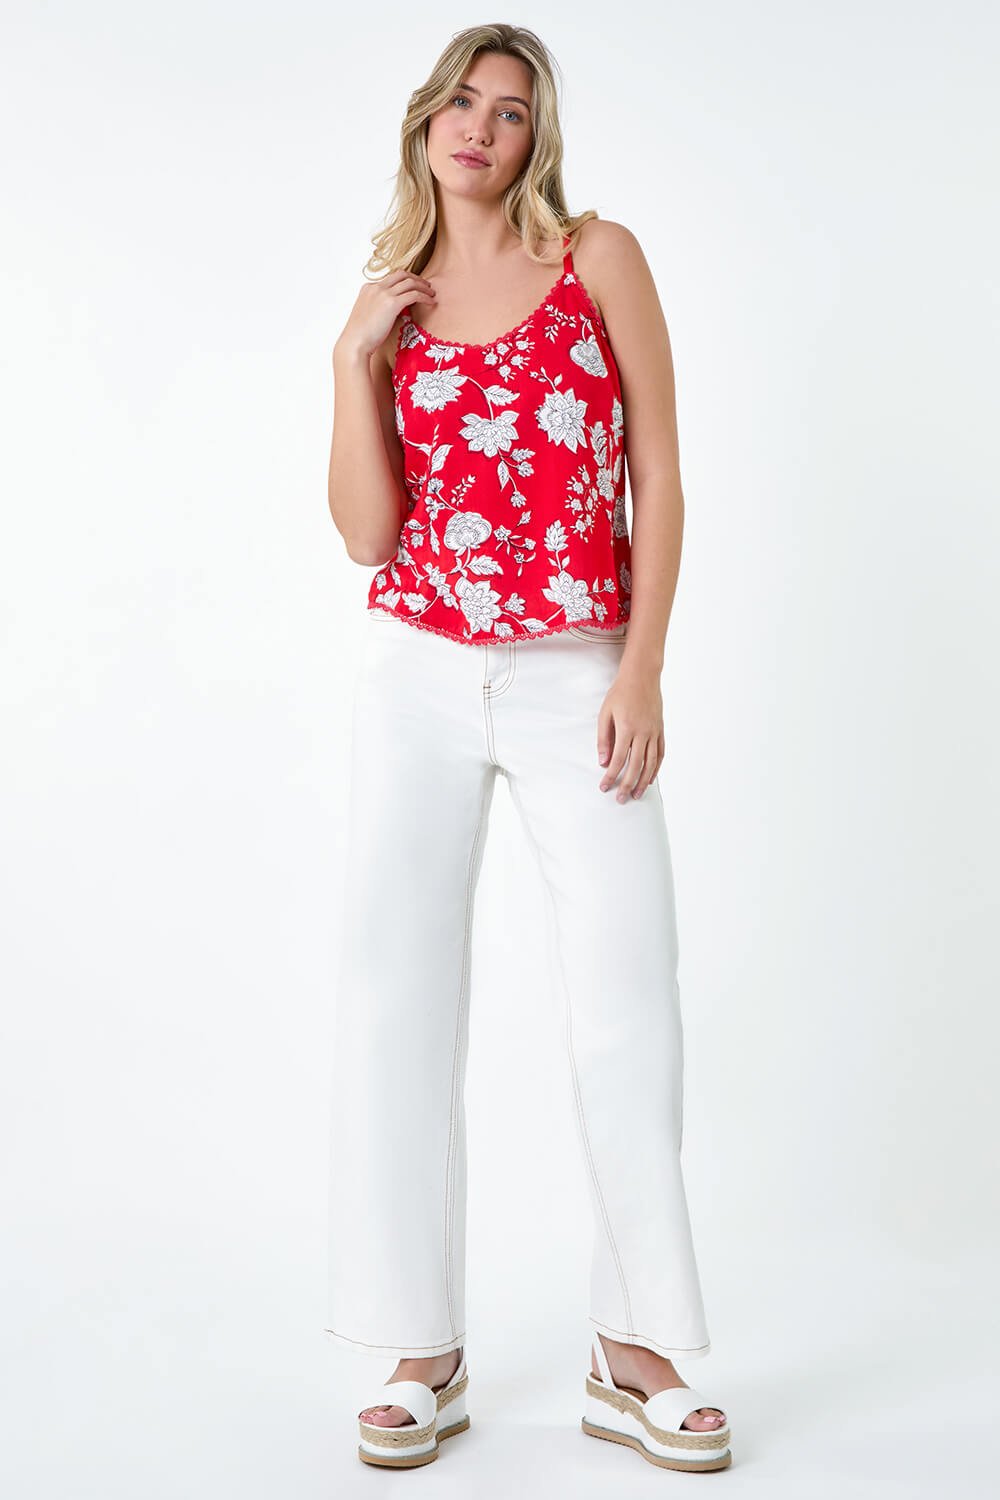 CORAL Ditsy Floral Lace Trim Top, Image 2 of 5